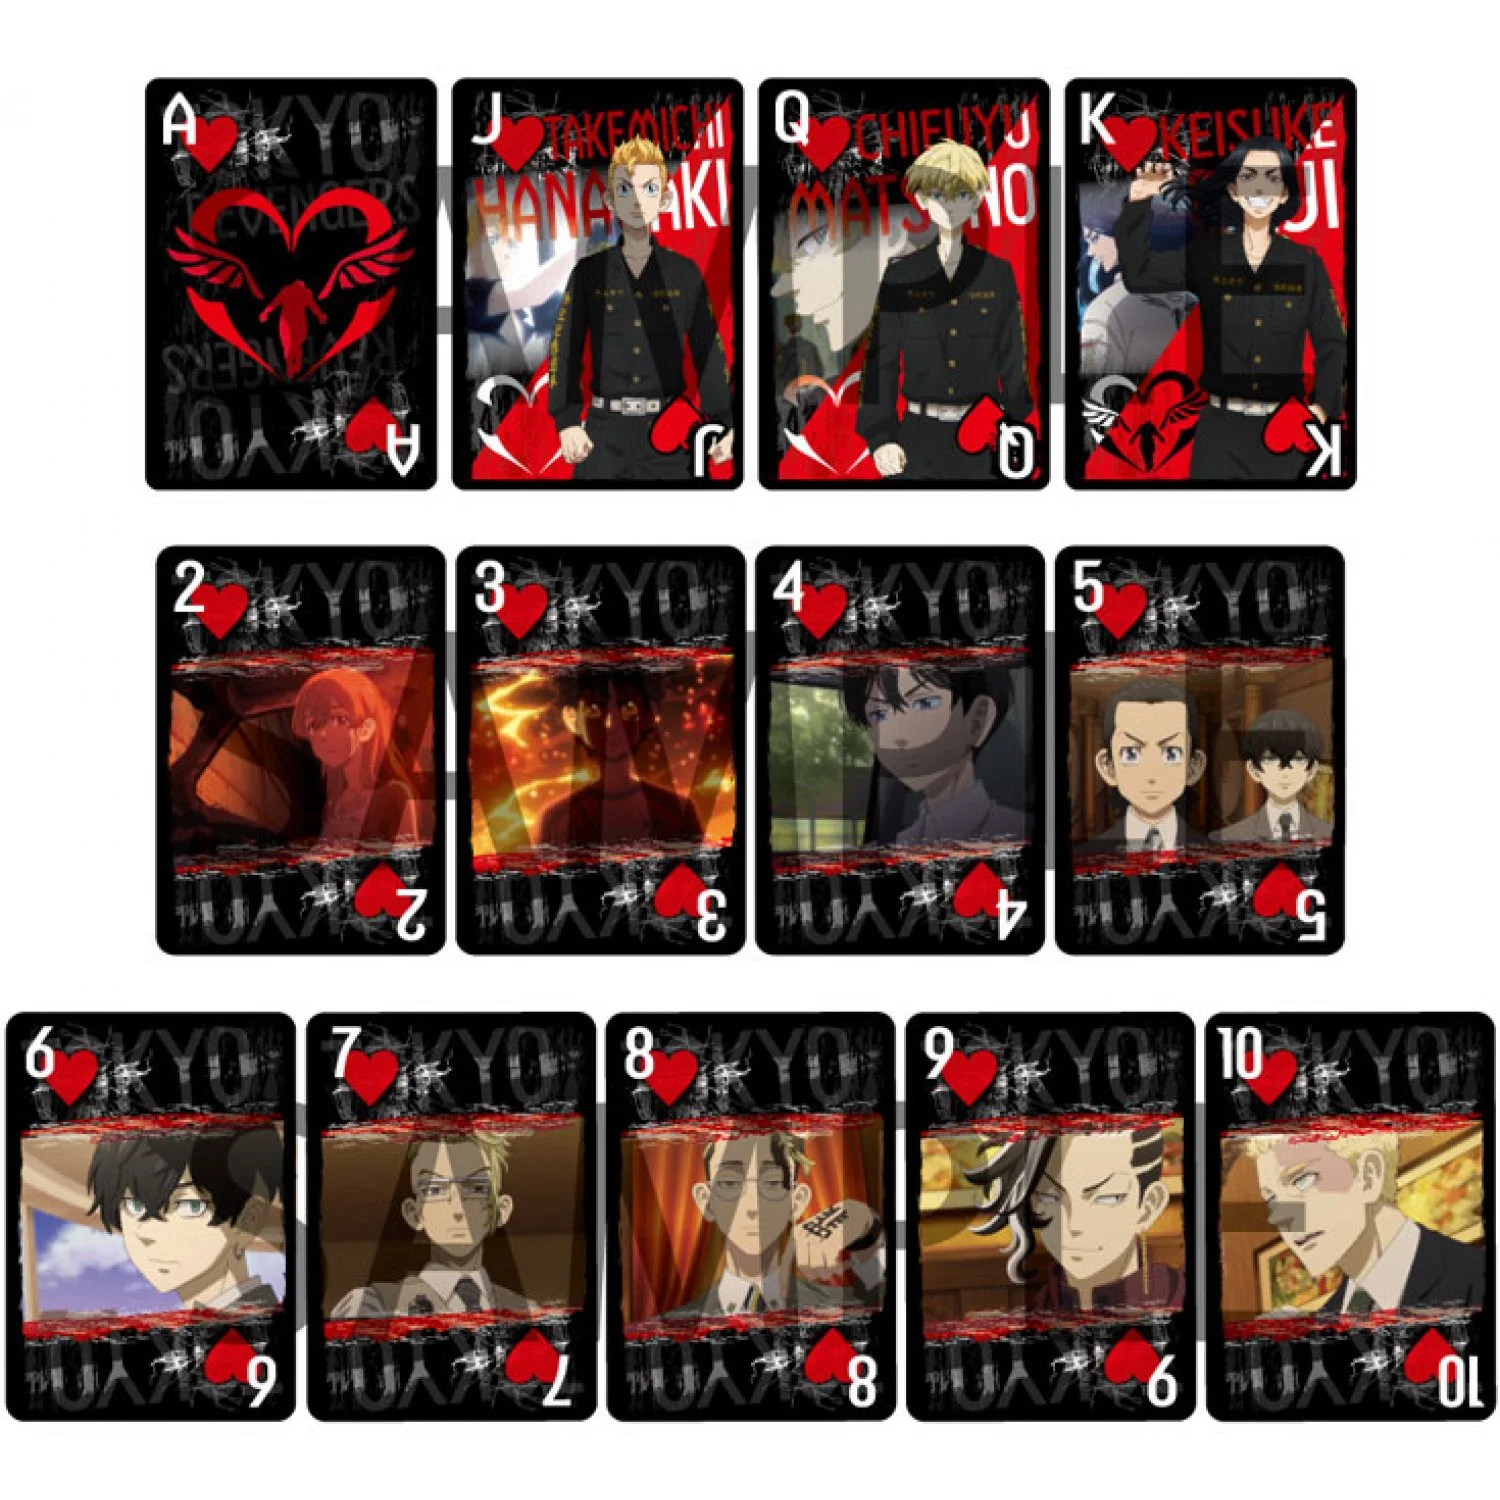 tokyo revengers playing cards 710335.3 - Fandomaniax Store